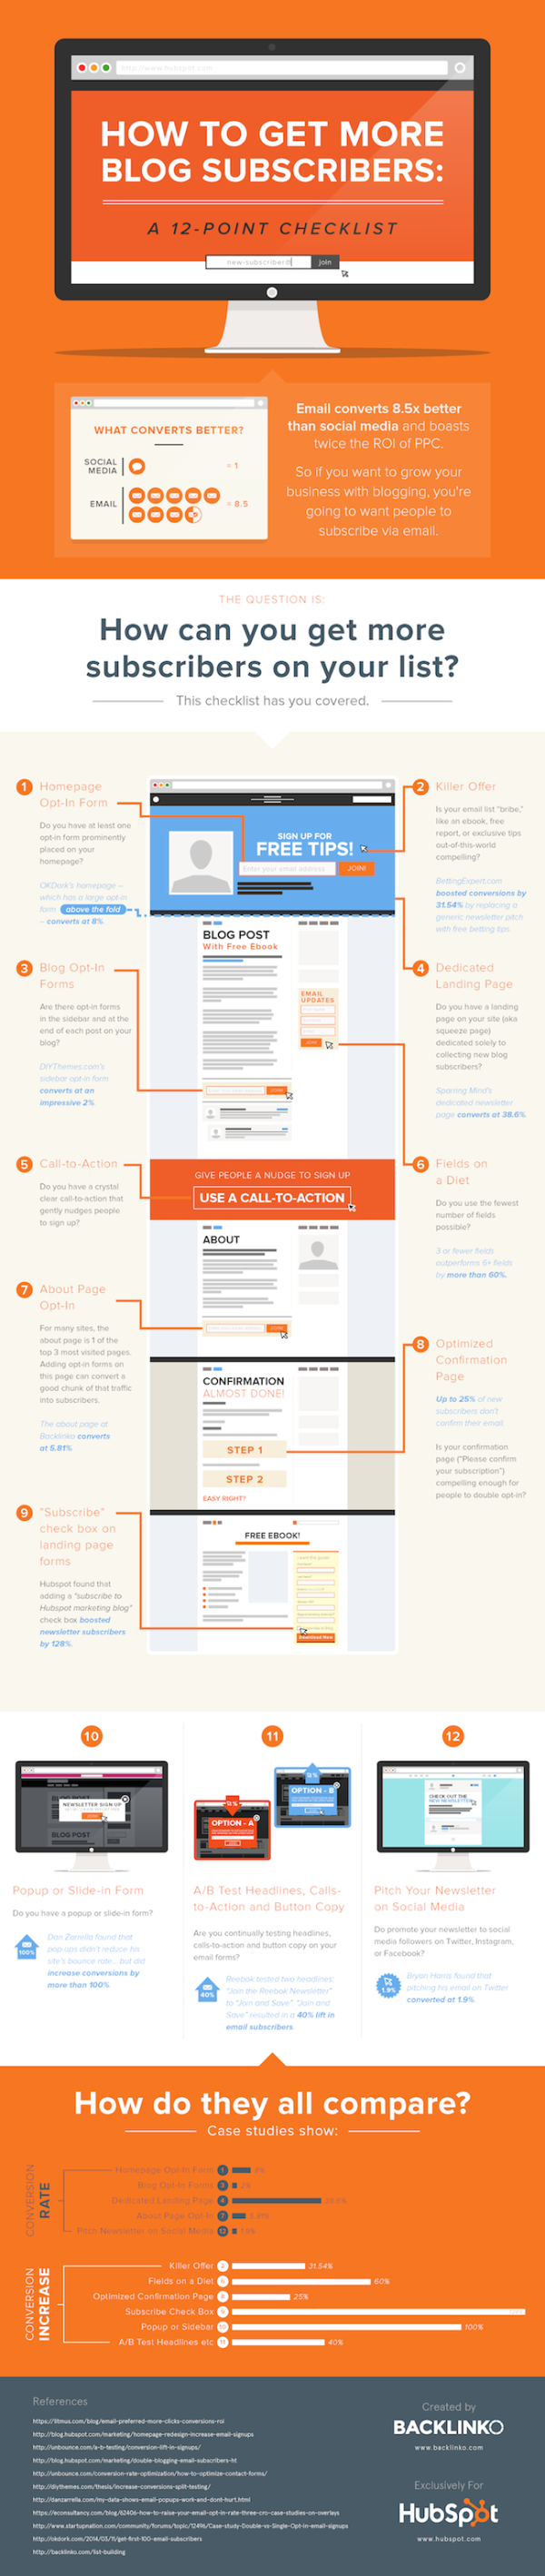 blog infographic by Hubspot